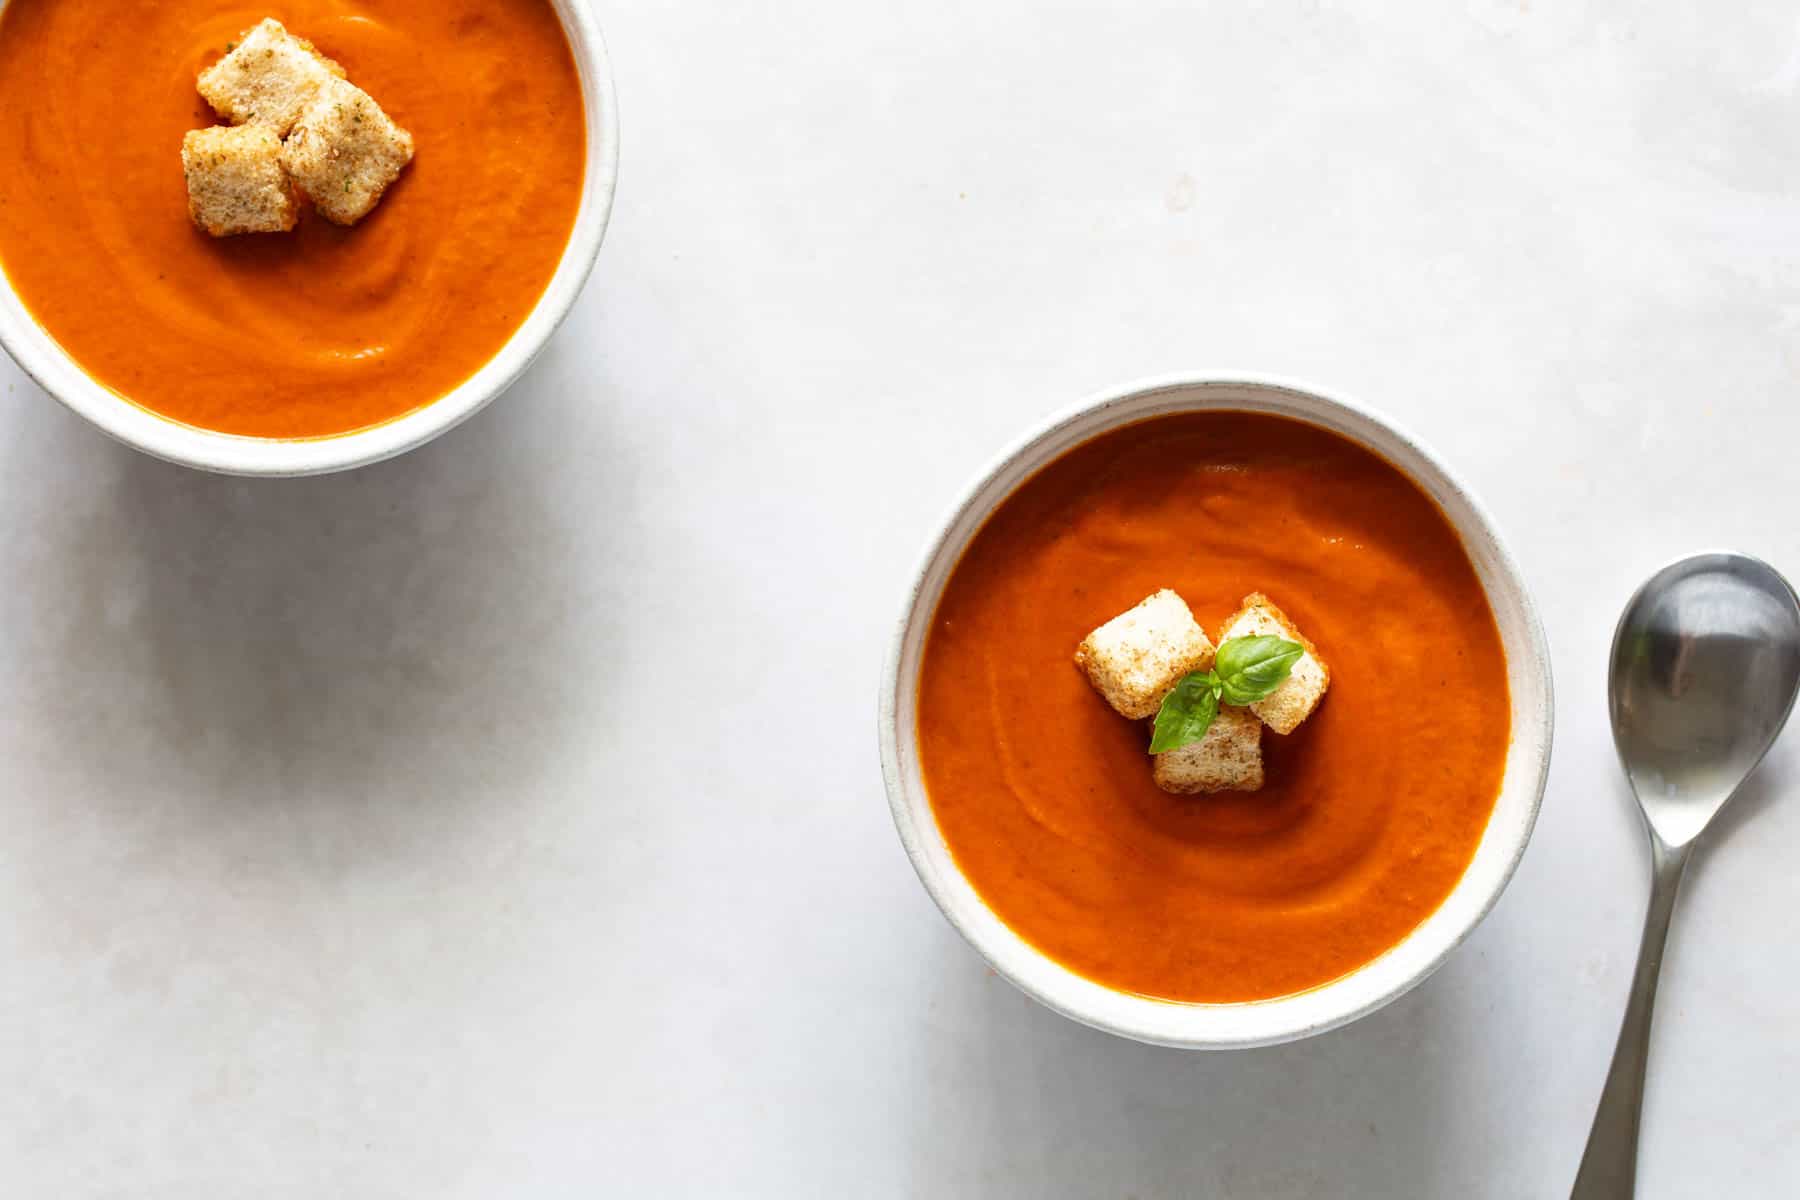 Two bowls of tomato soup topped with croutons and basil leaves, placed on a light-colored surface with a spoon beside one of the bowls.